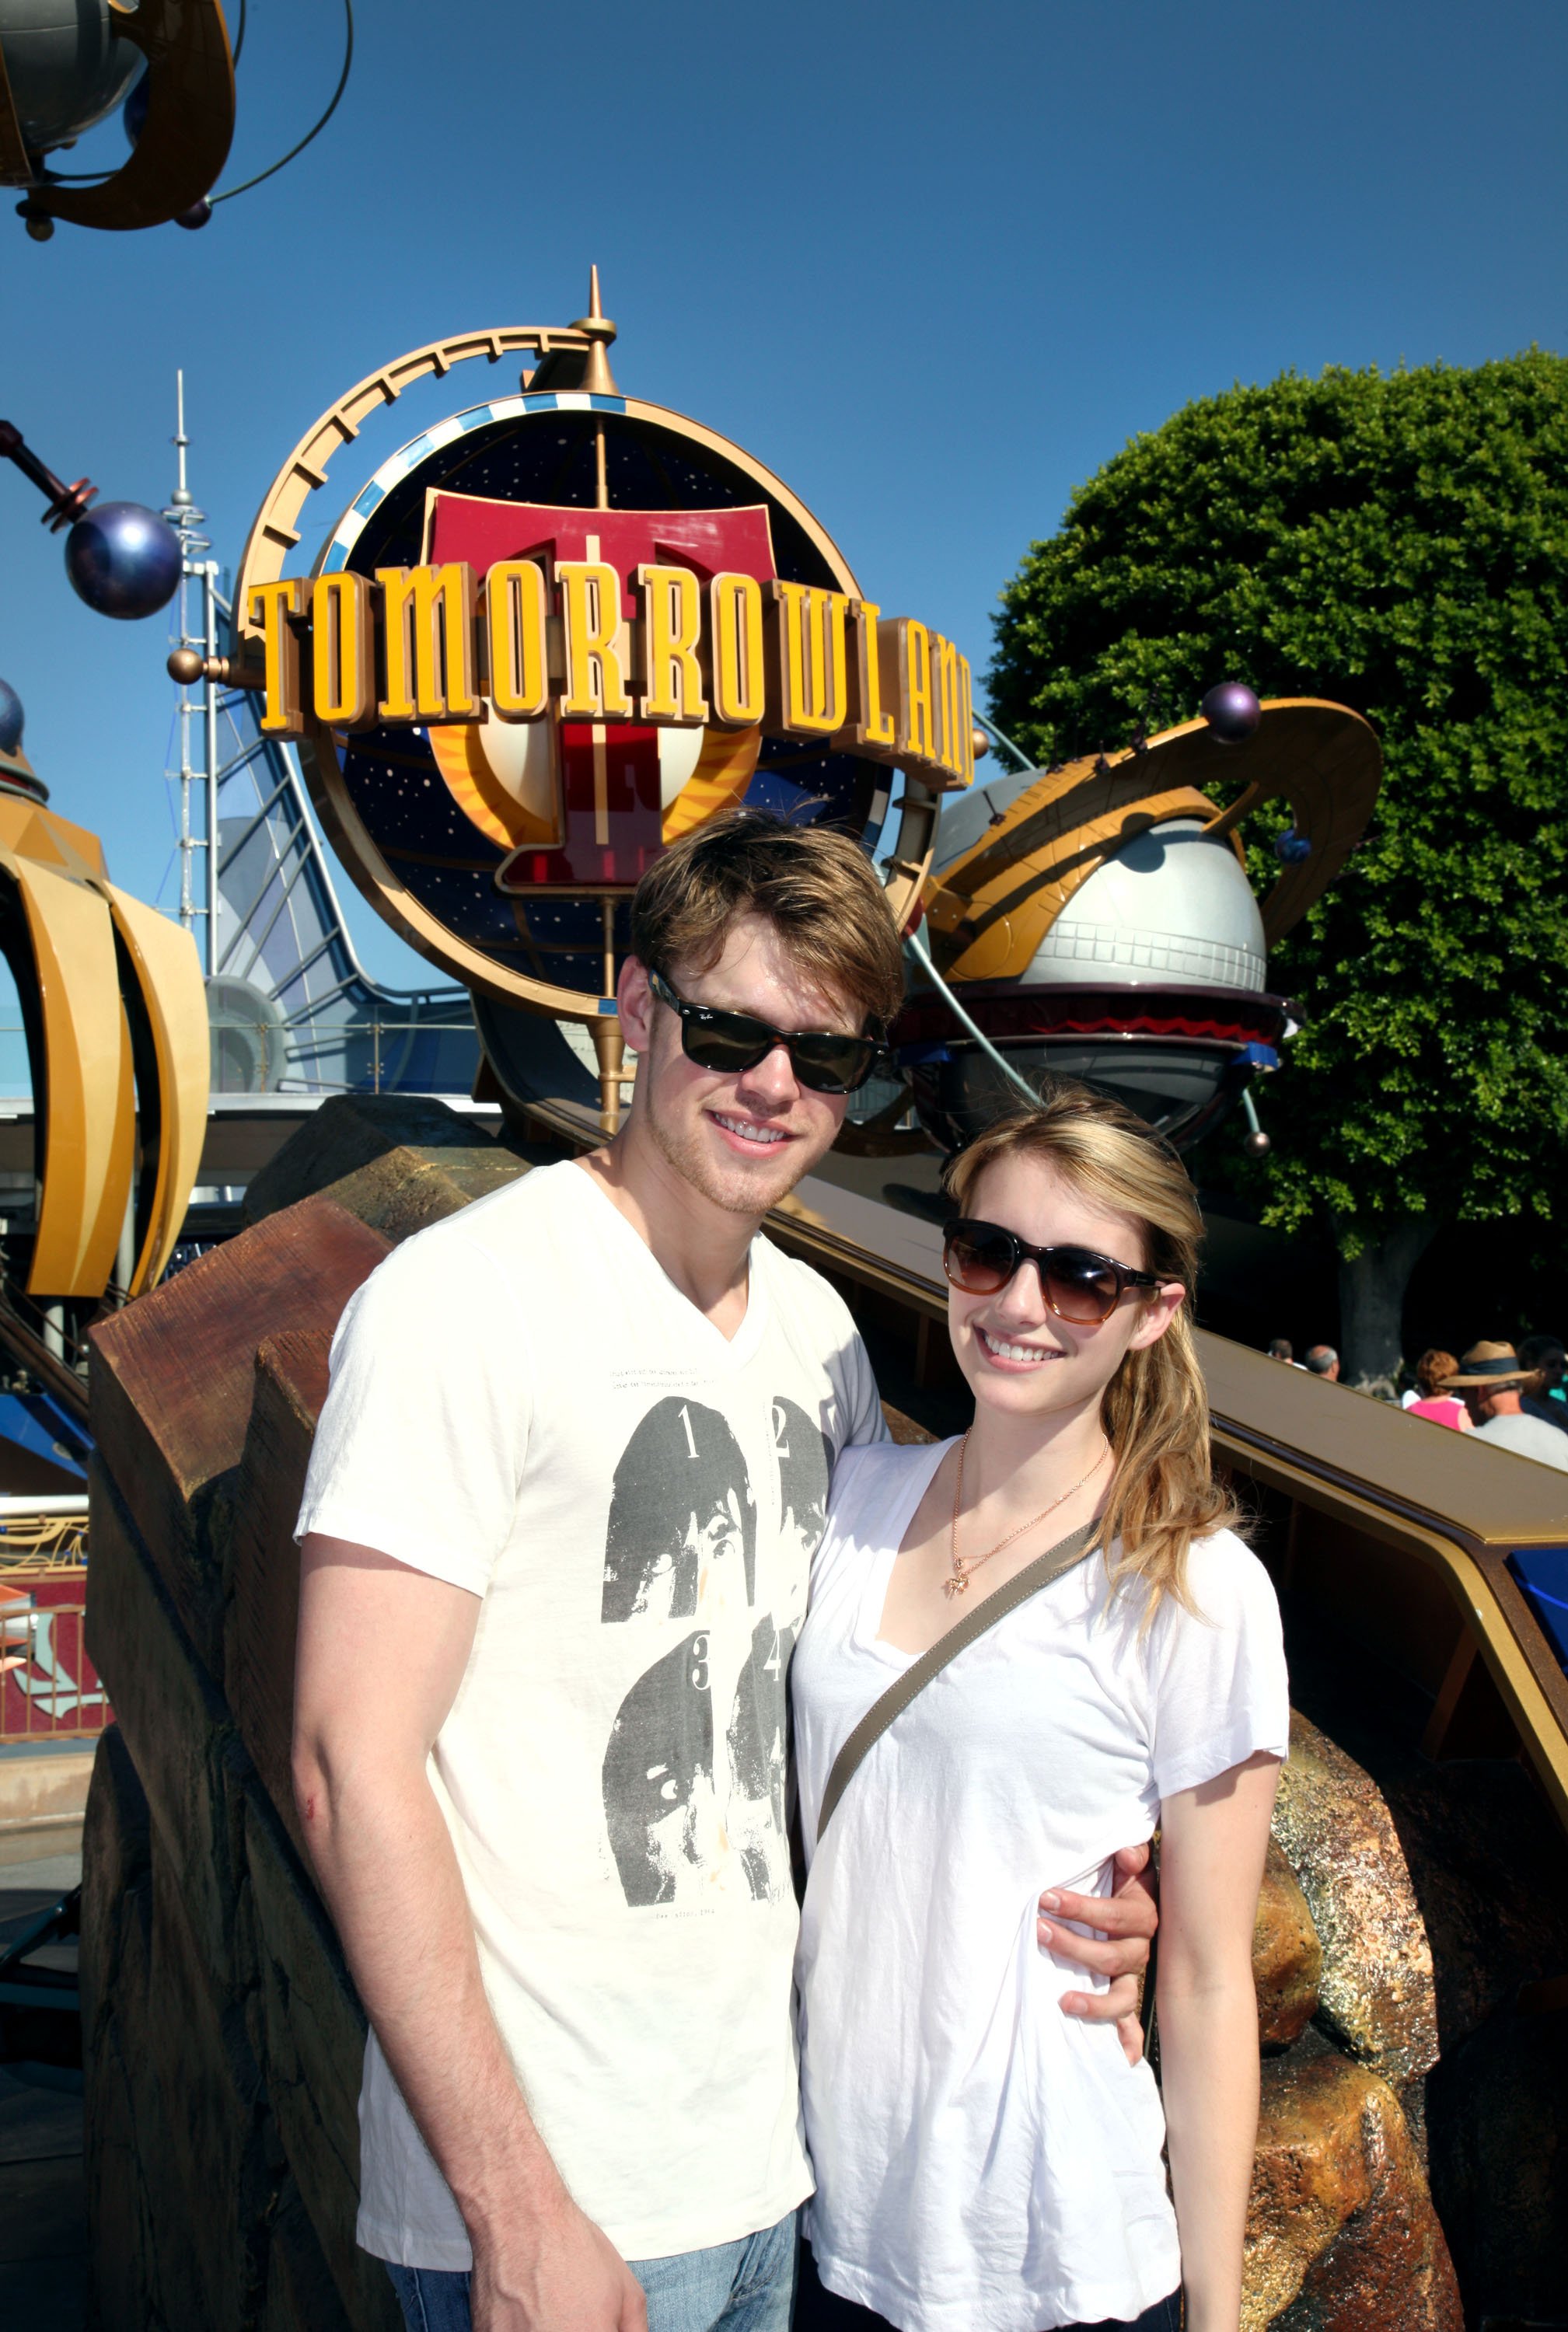 Chord Overstreet and Emma Roberts pose in front of the entrance to Tomorrowland at Disneyland on August 15, 2010, in Anaheim, California. | Source: Getty Images